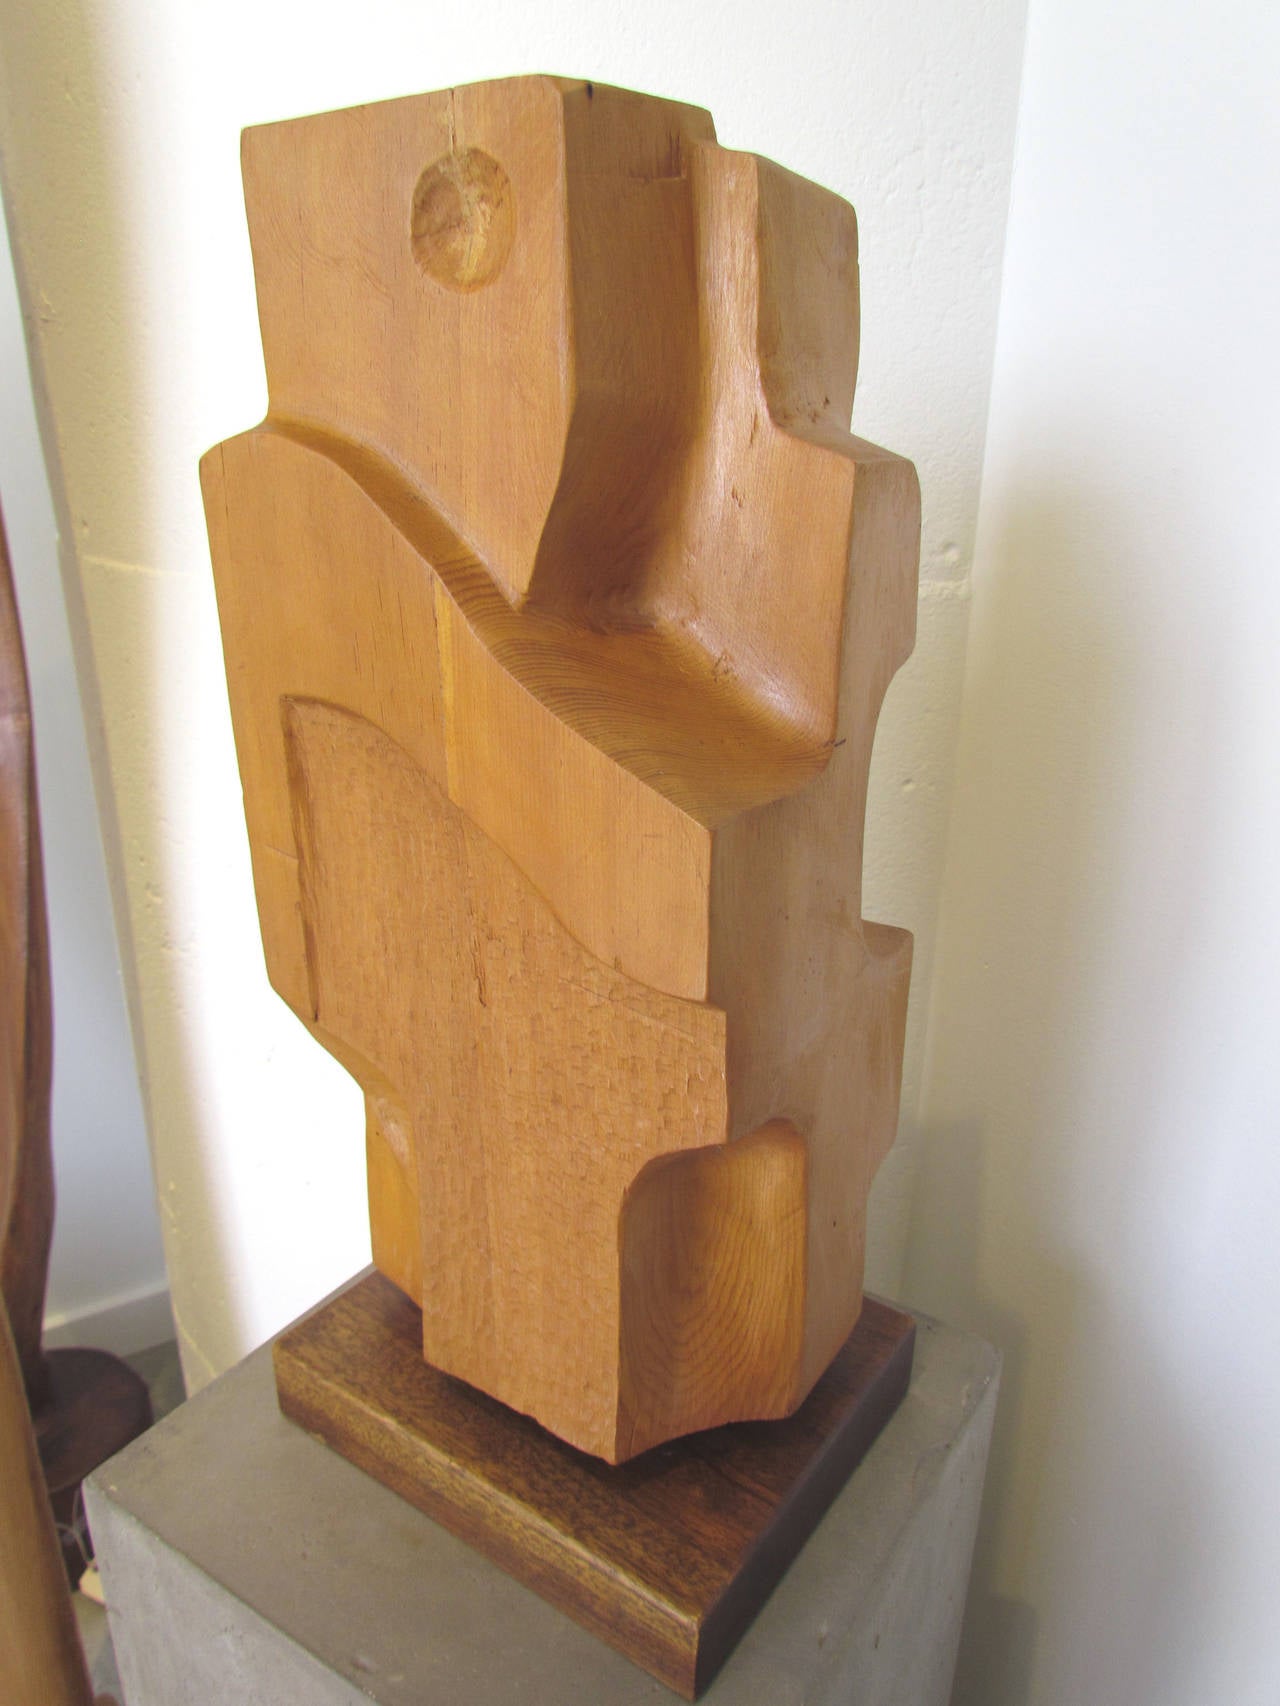 Abstract figural hand-carved wood sculpture, signed and dated 1971.